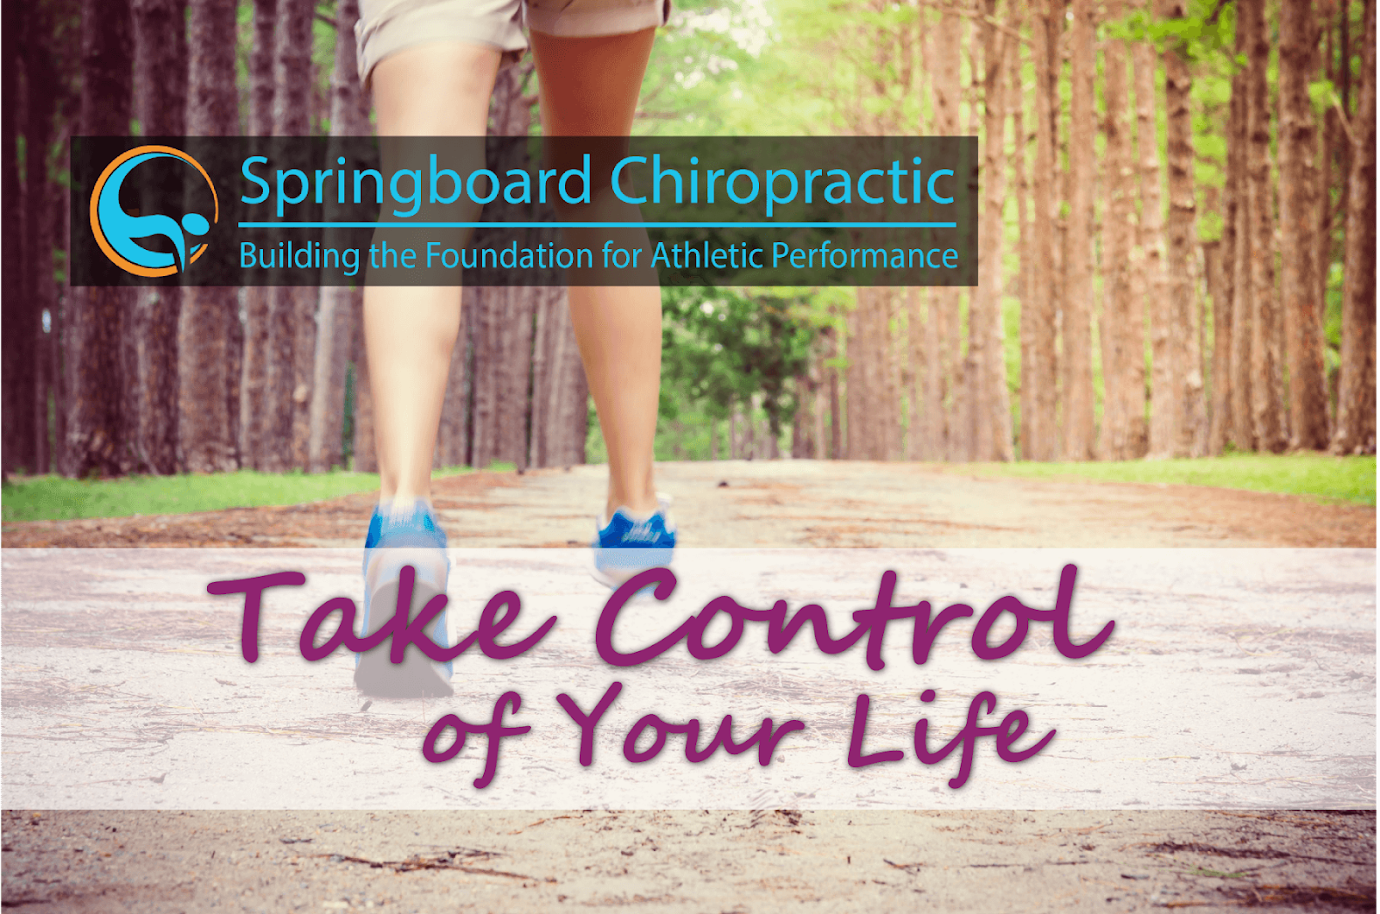 Springboard Chiropractic & Athletic Performance